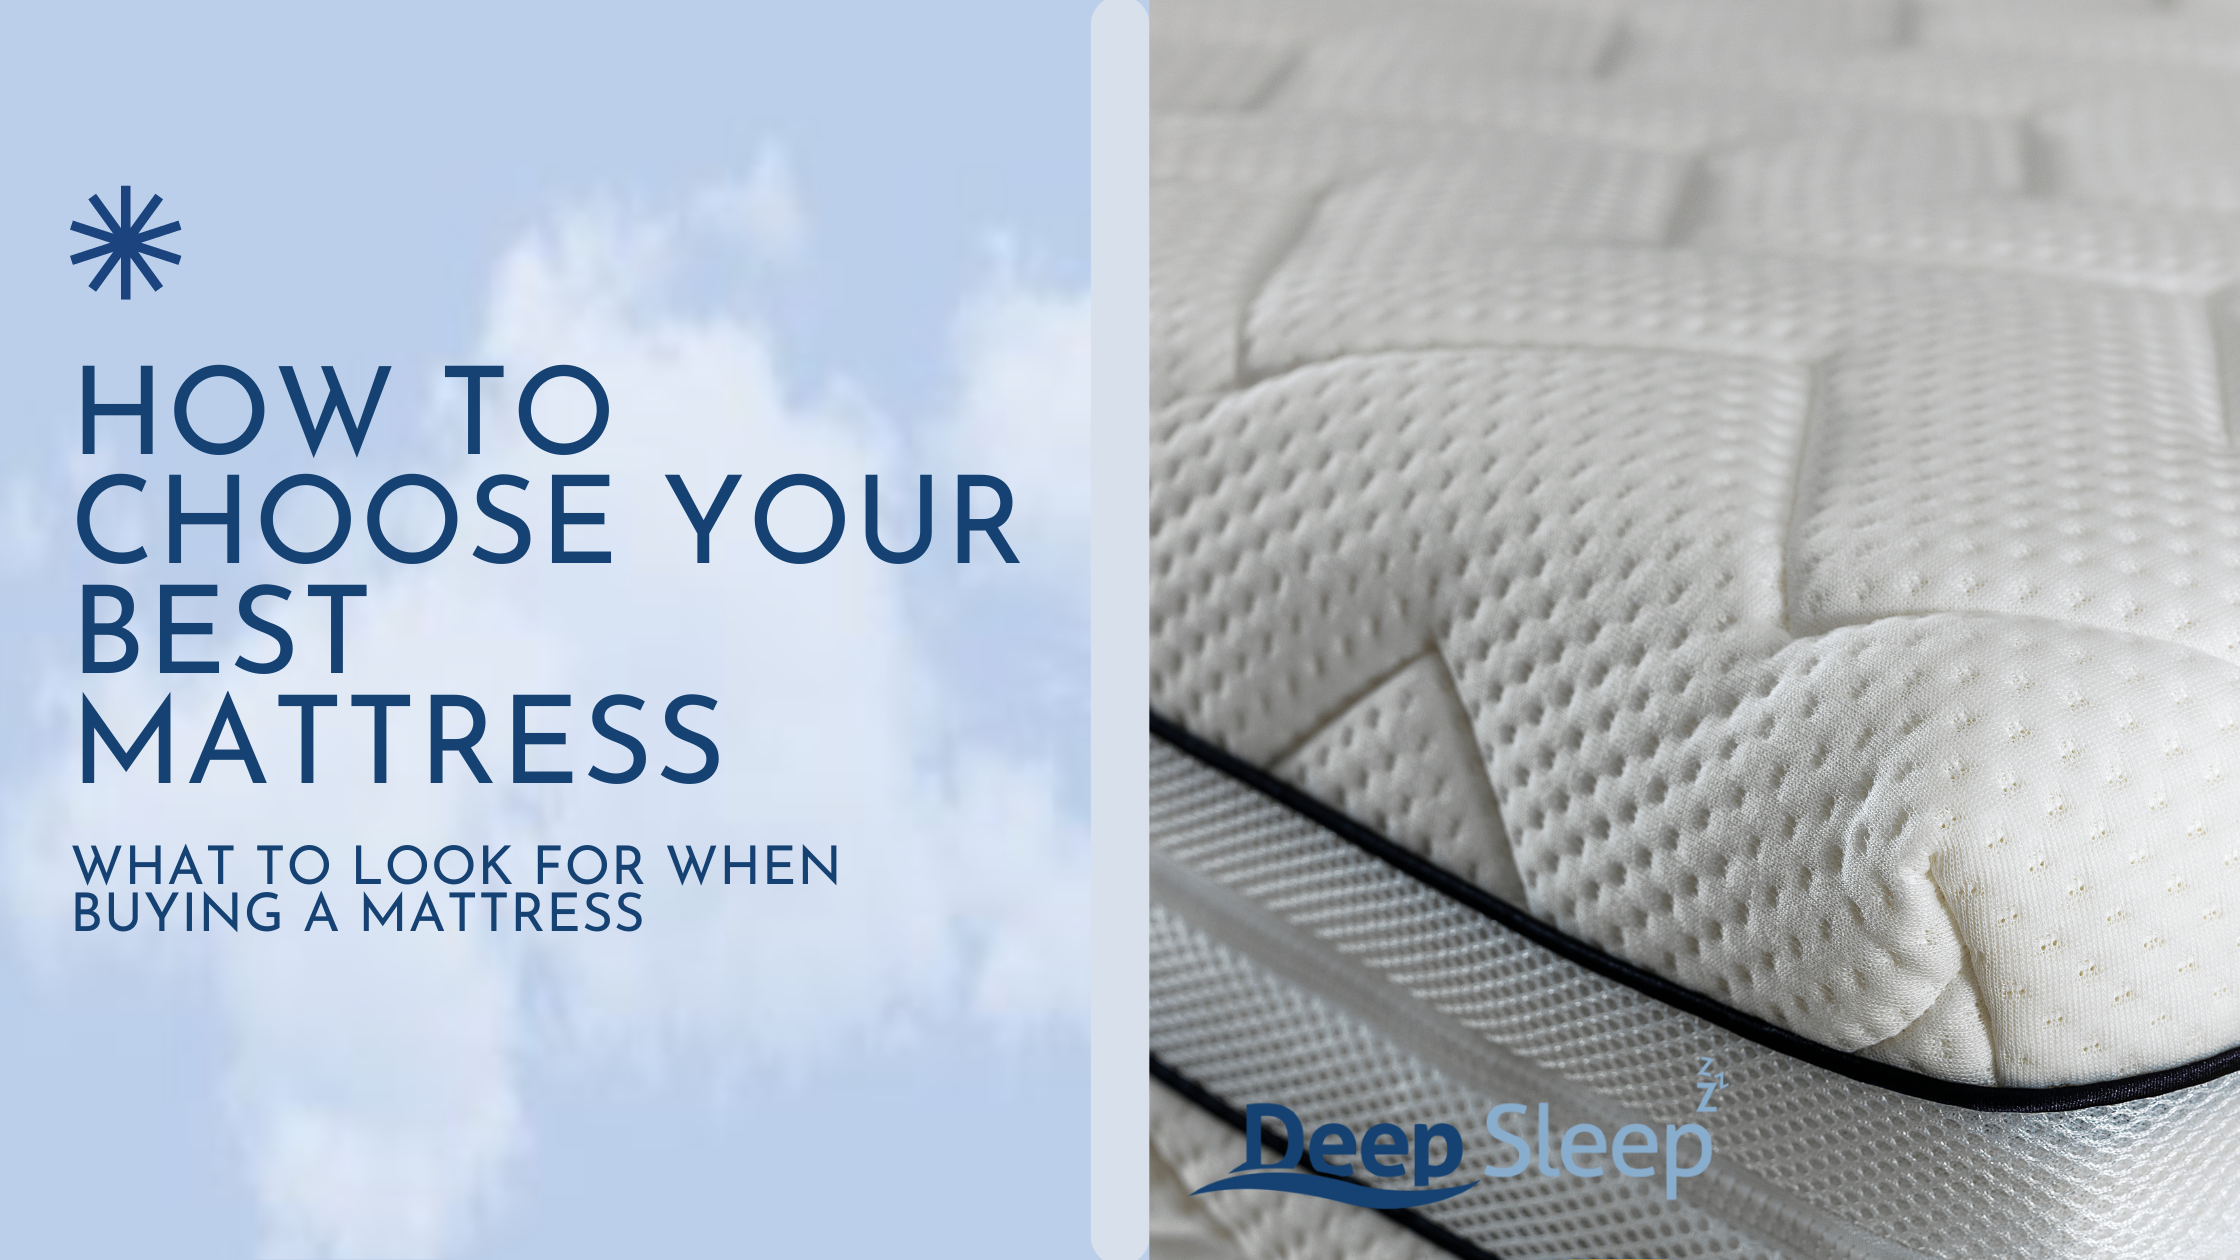 How to choose your best mattress